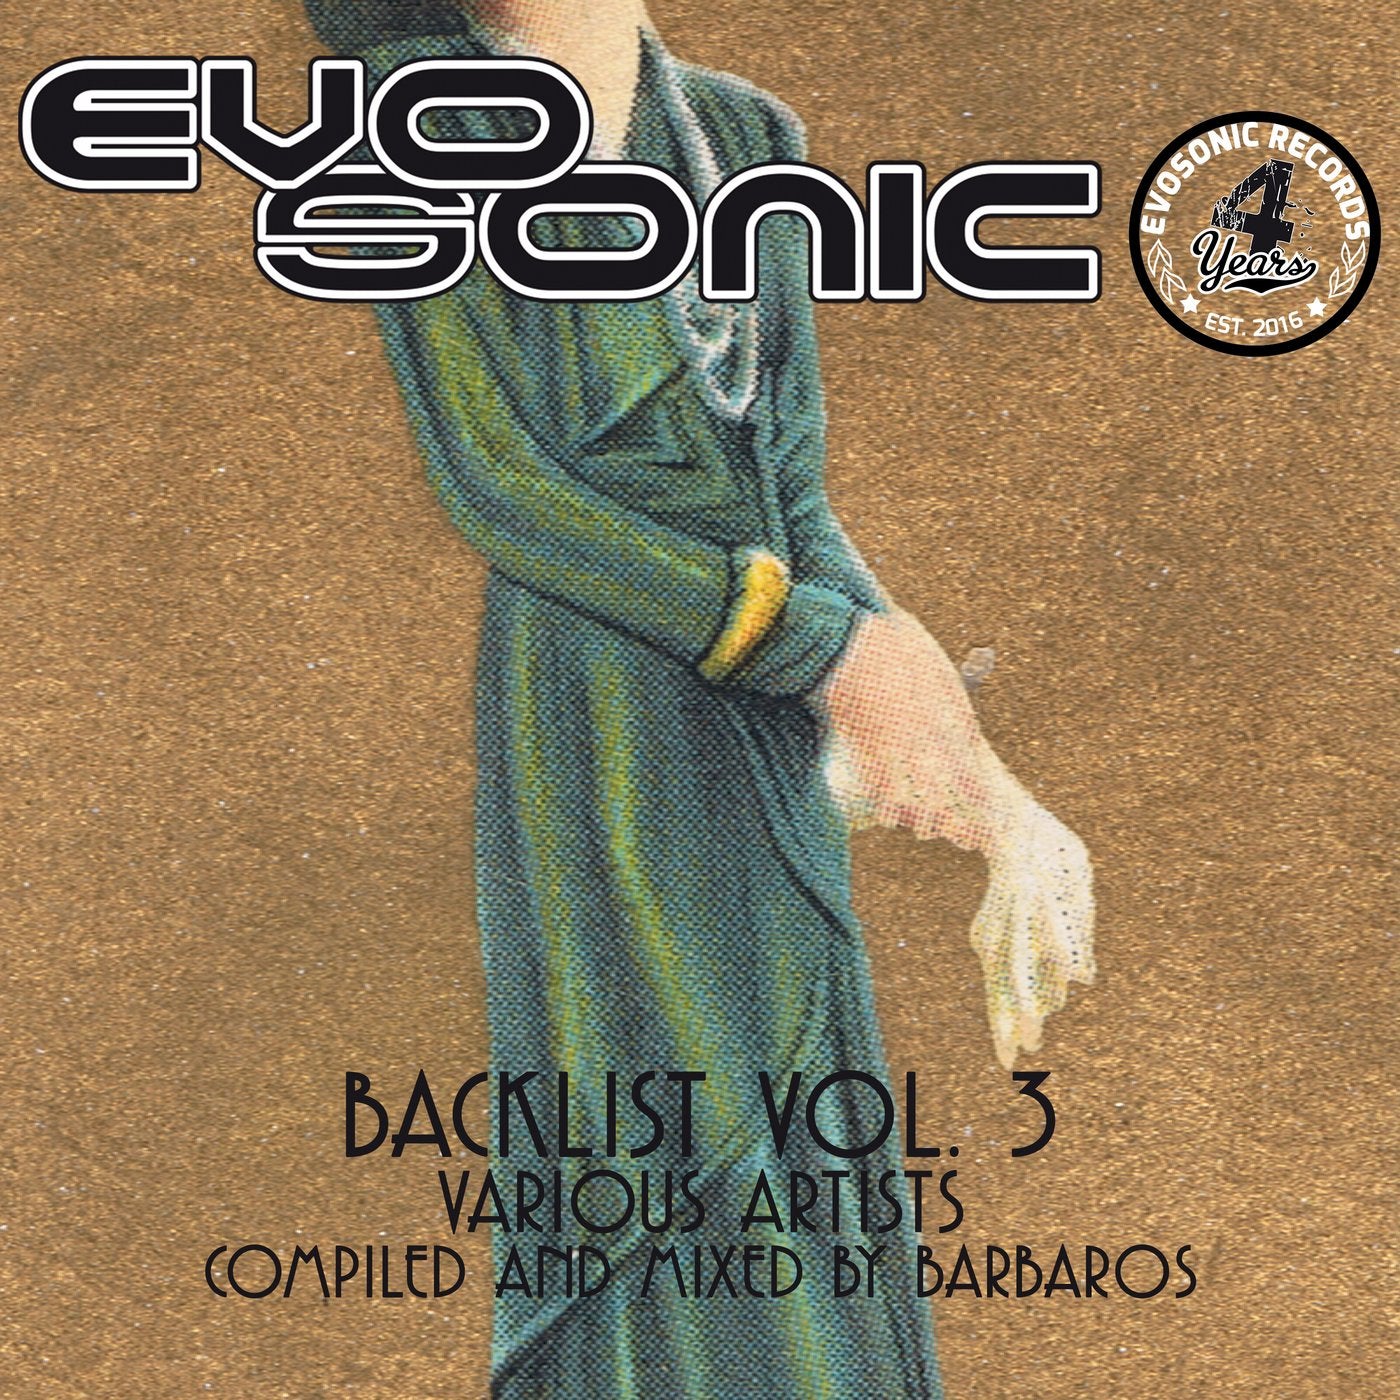 Backlist Vol. 3 (Compiled And Mixed By Barbaros)